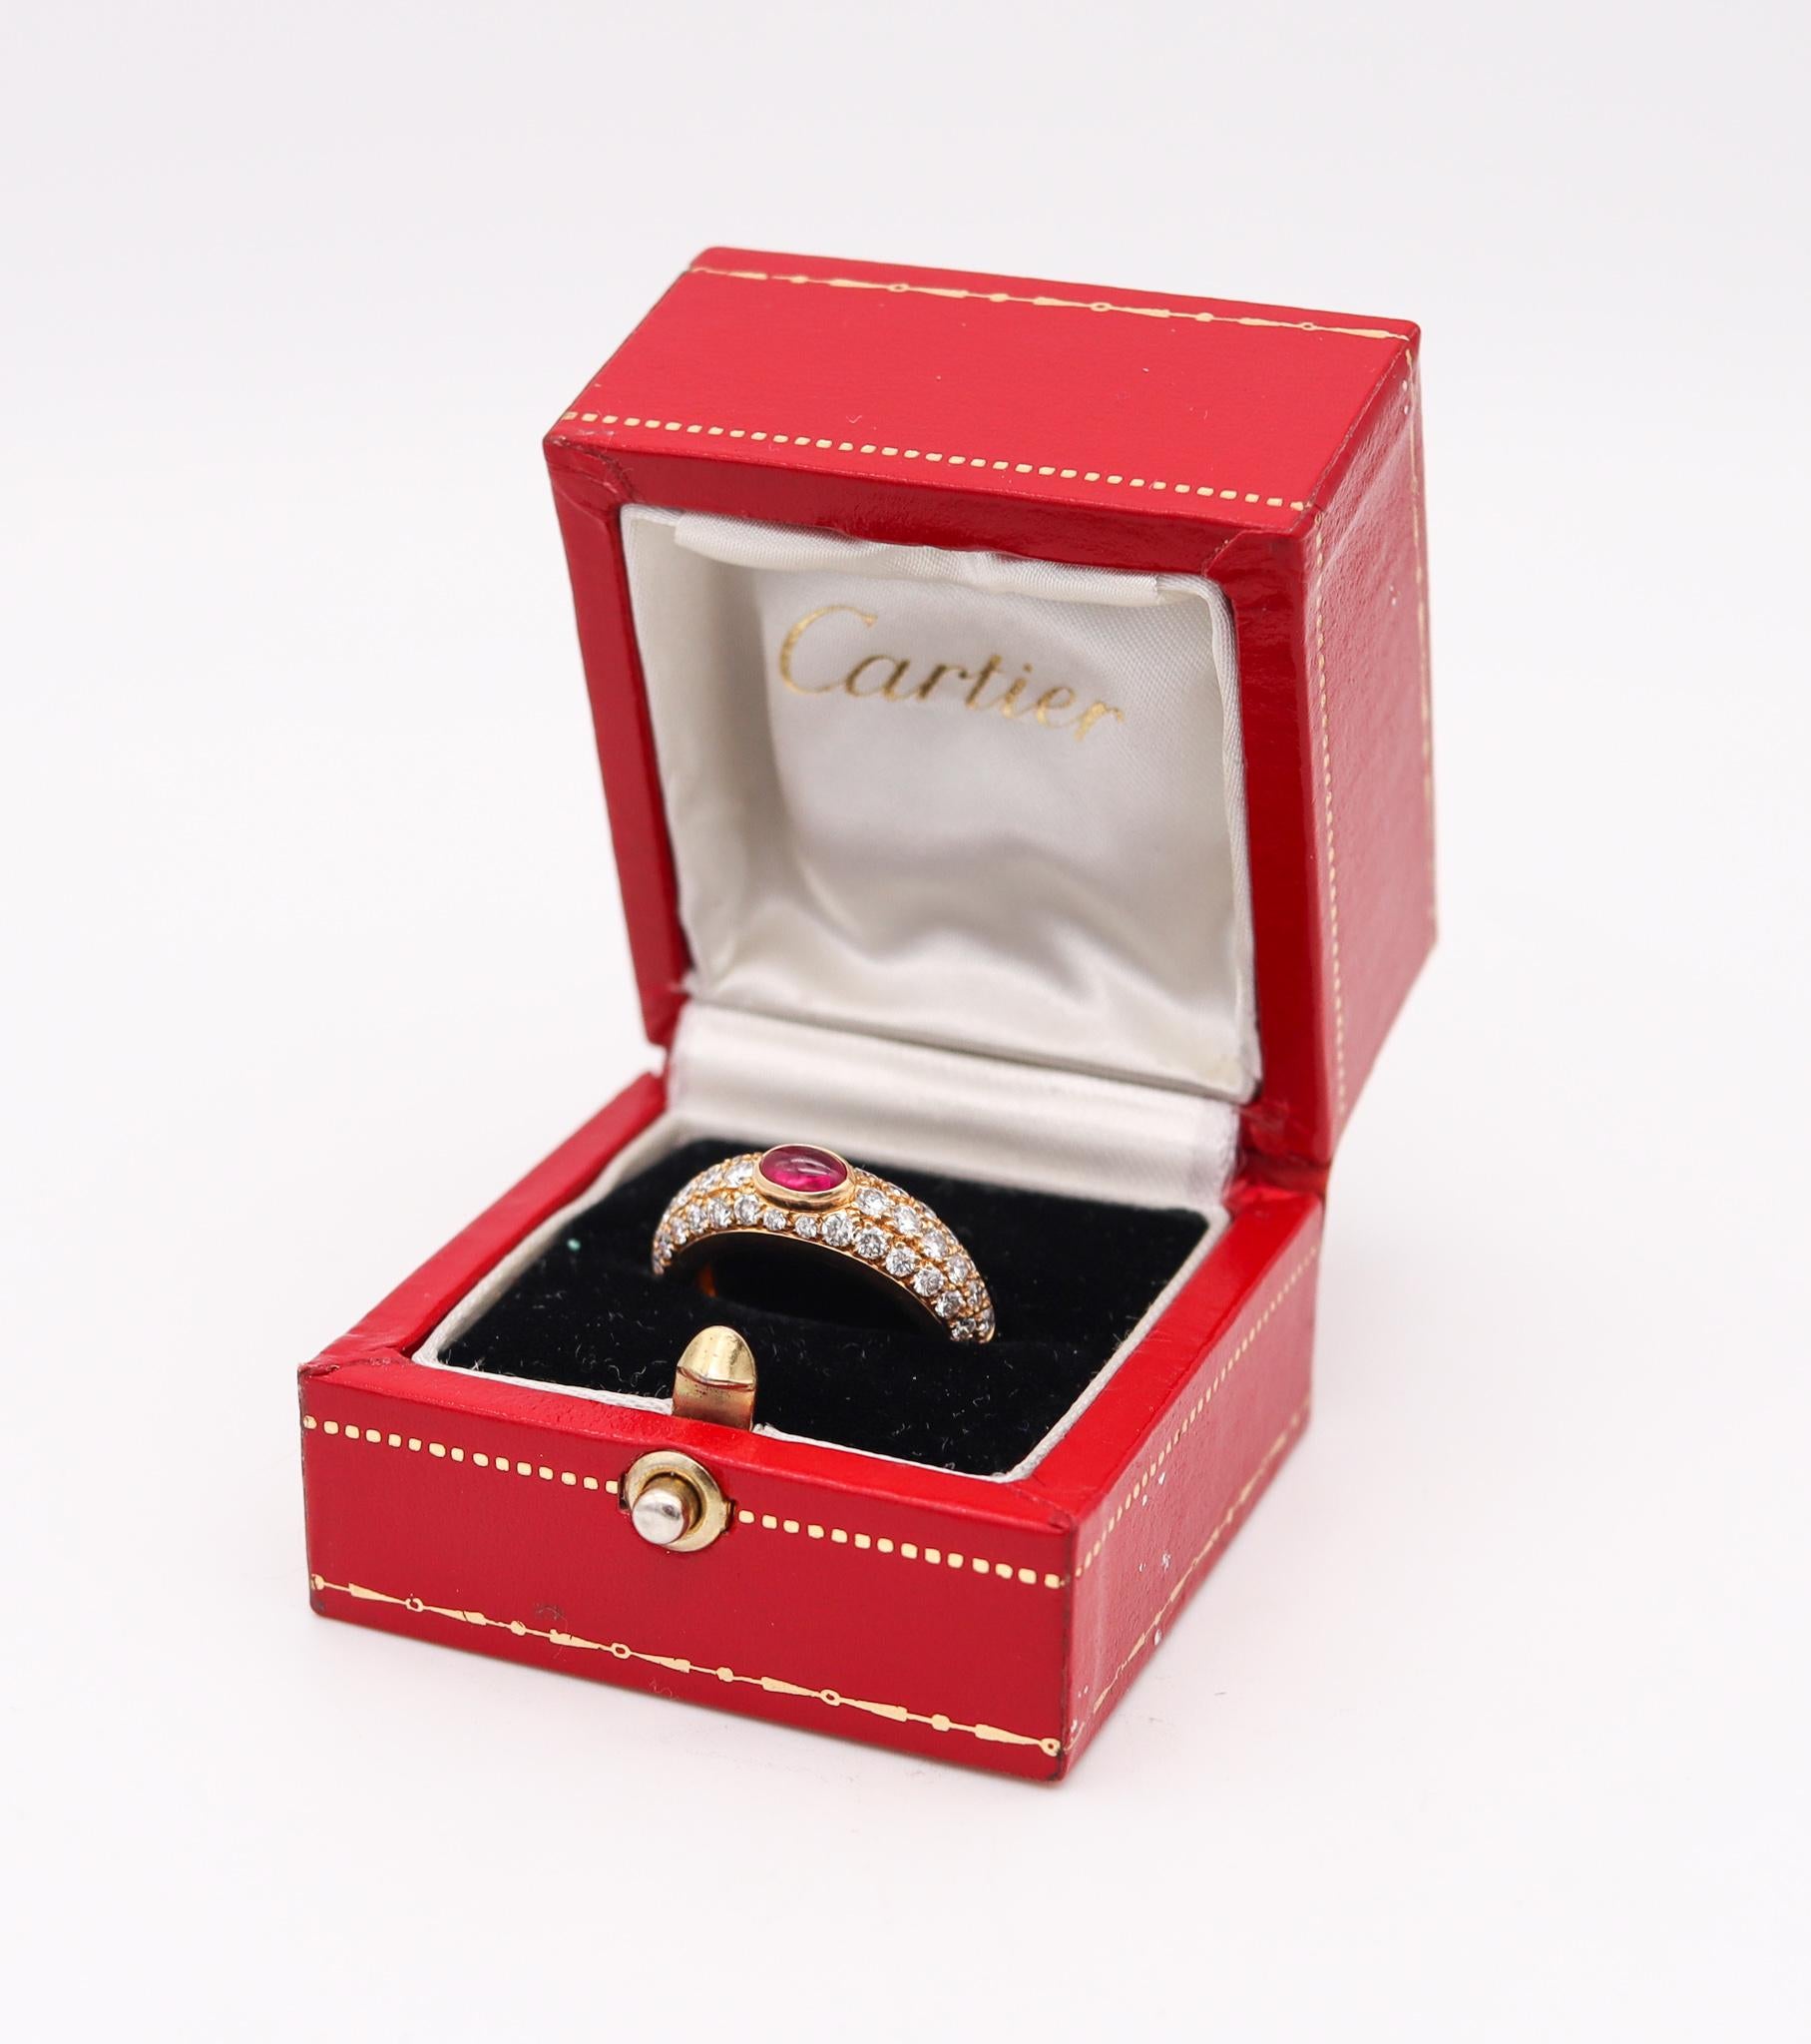 Modern Cartier Paris Gems Set Ring in 18Kt Gold with 2.29 Cts Diamond and Burmese Ruby